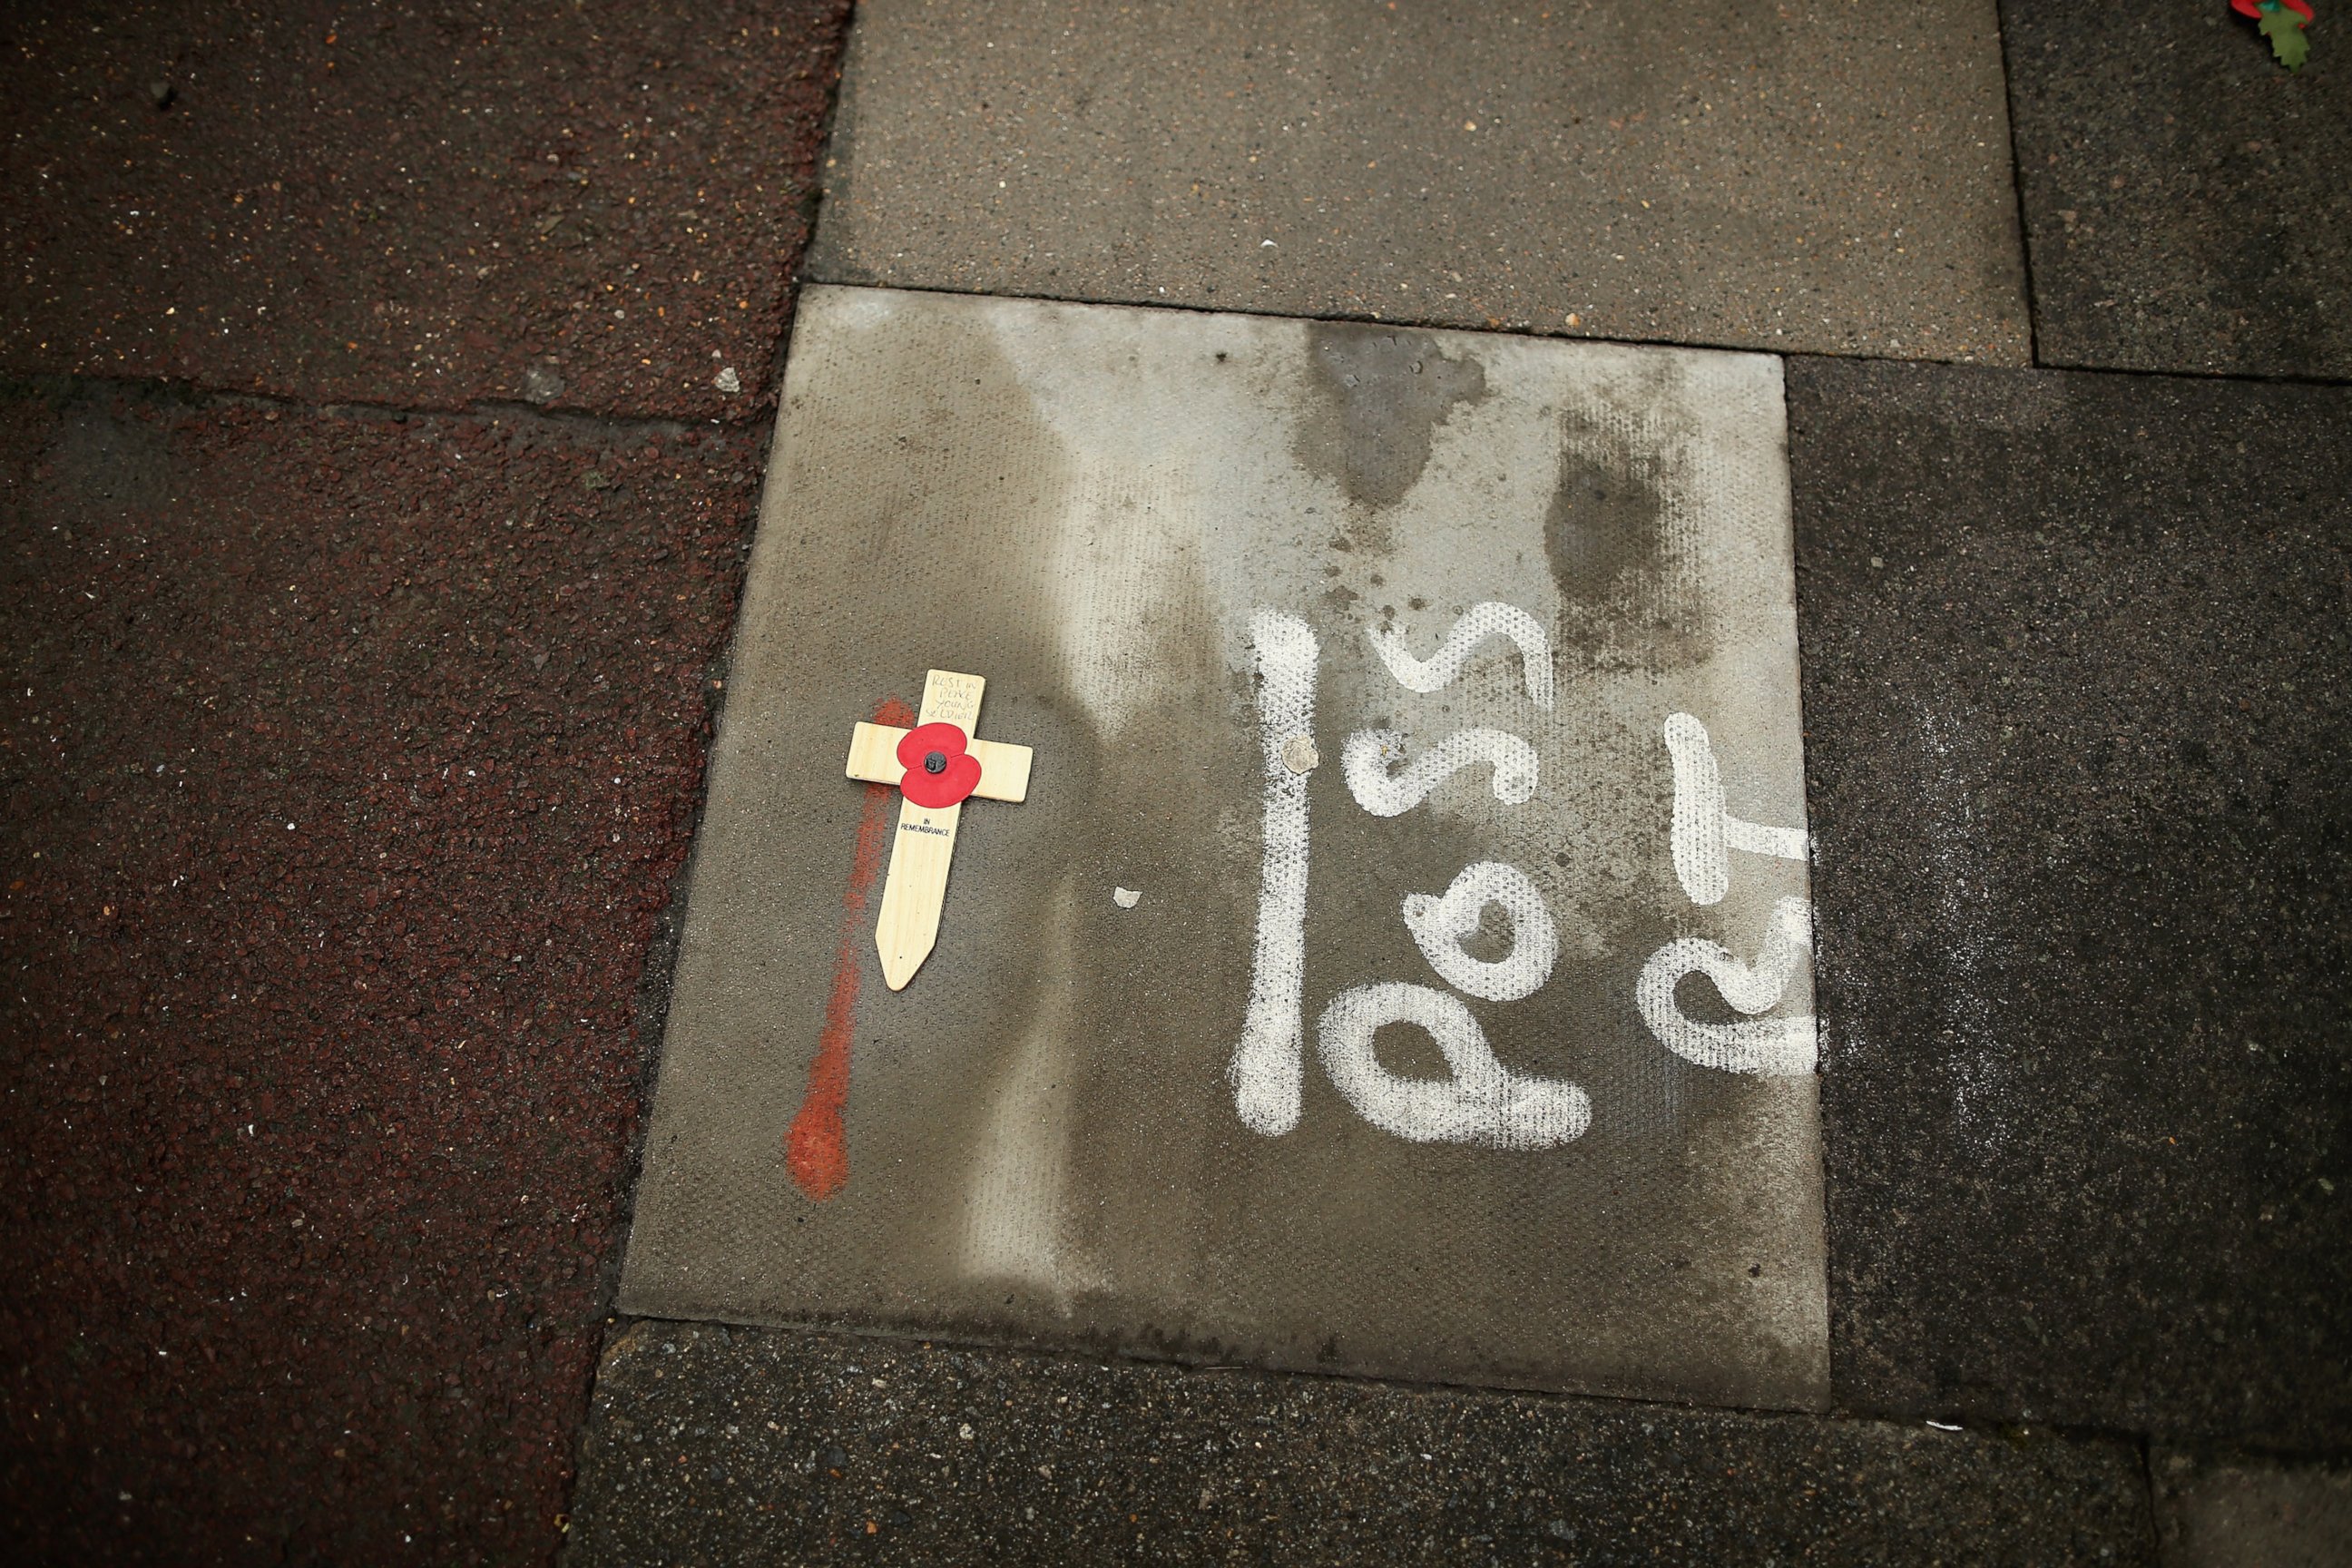 PHOTO: A single cross lies on the pavement at the scene where Lee Rigby, a soldier of the 2nd Battalion the Royal Regiment of Fusiliers, was killed on May 24, 2013 in London.